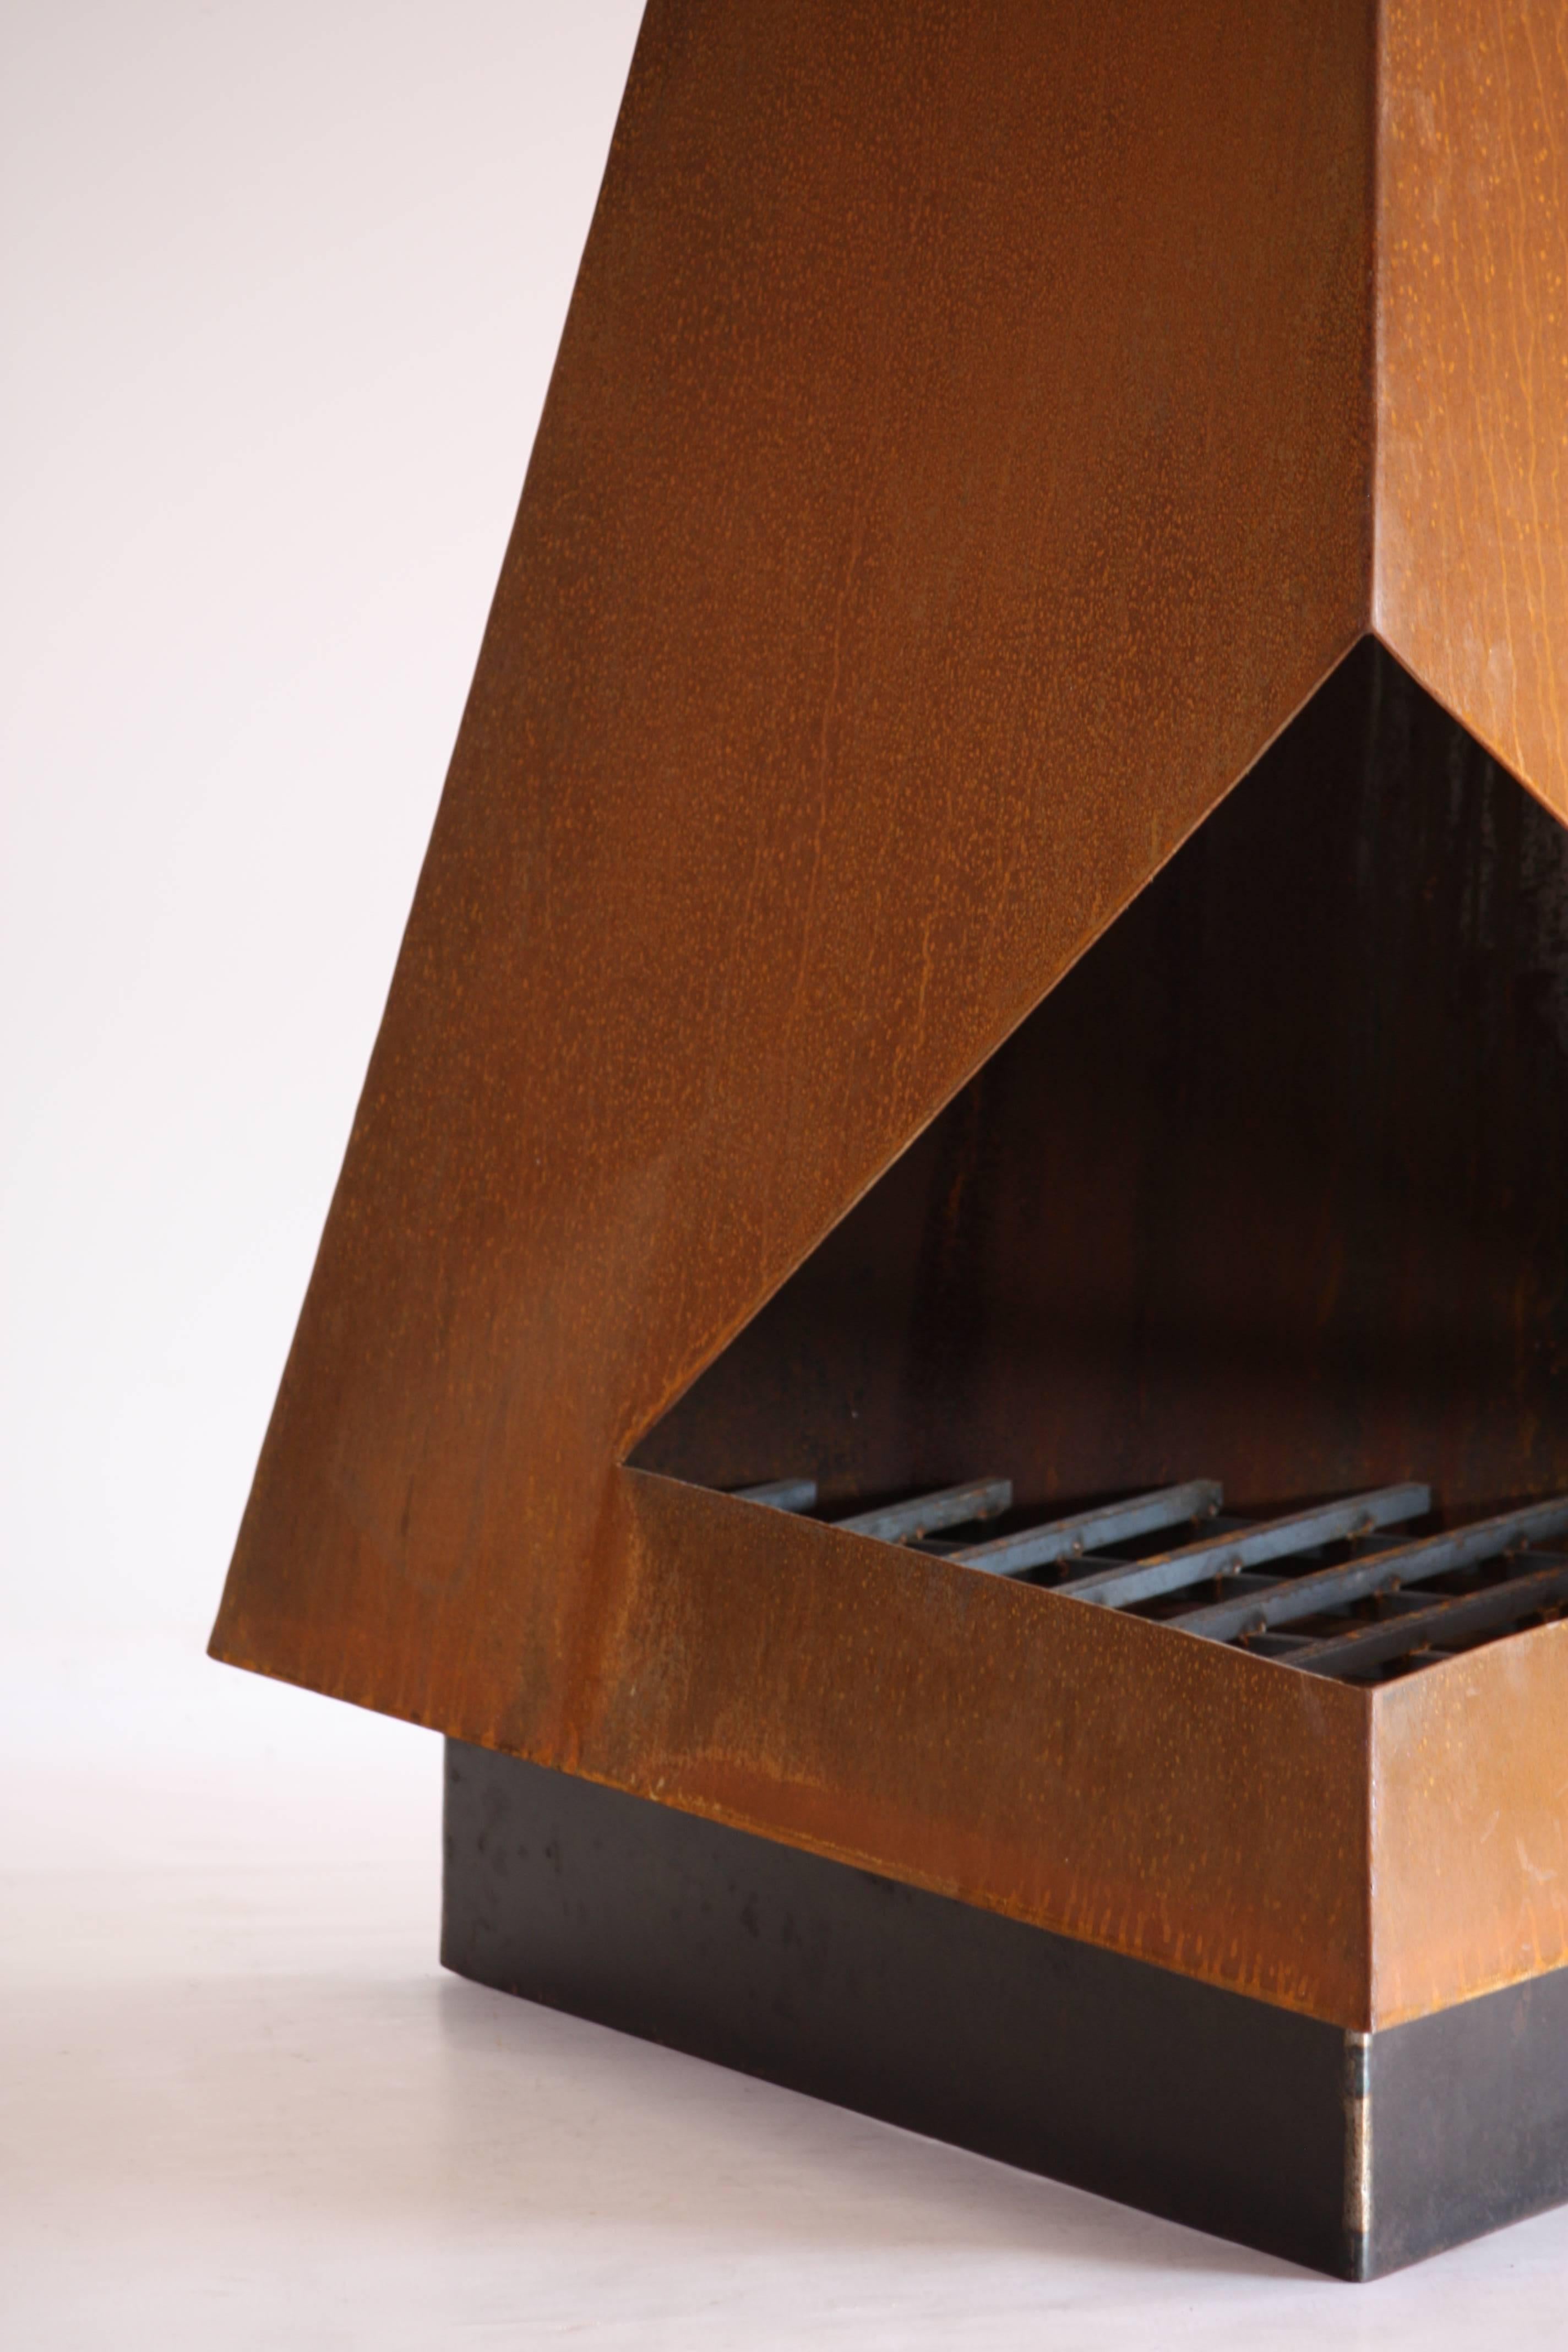 The Thee Steel Chiminea Fireplace by Space 20th Century Modern. This is not your usual Chiminea or Fireplace. This high design, steel sculptural piece will make a statement in any outdoor space. Functionally, it is perfect on that cold evening, but